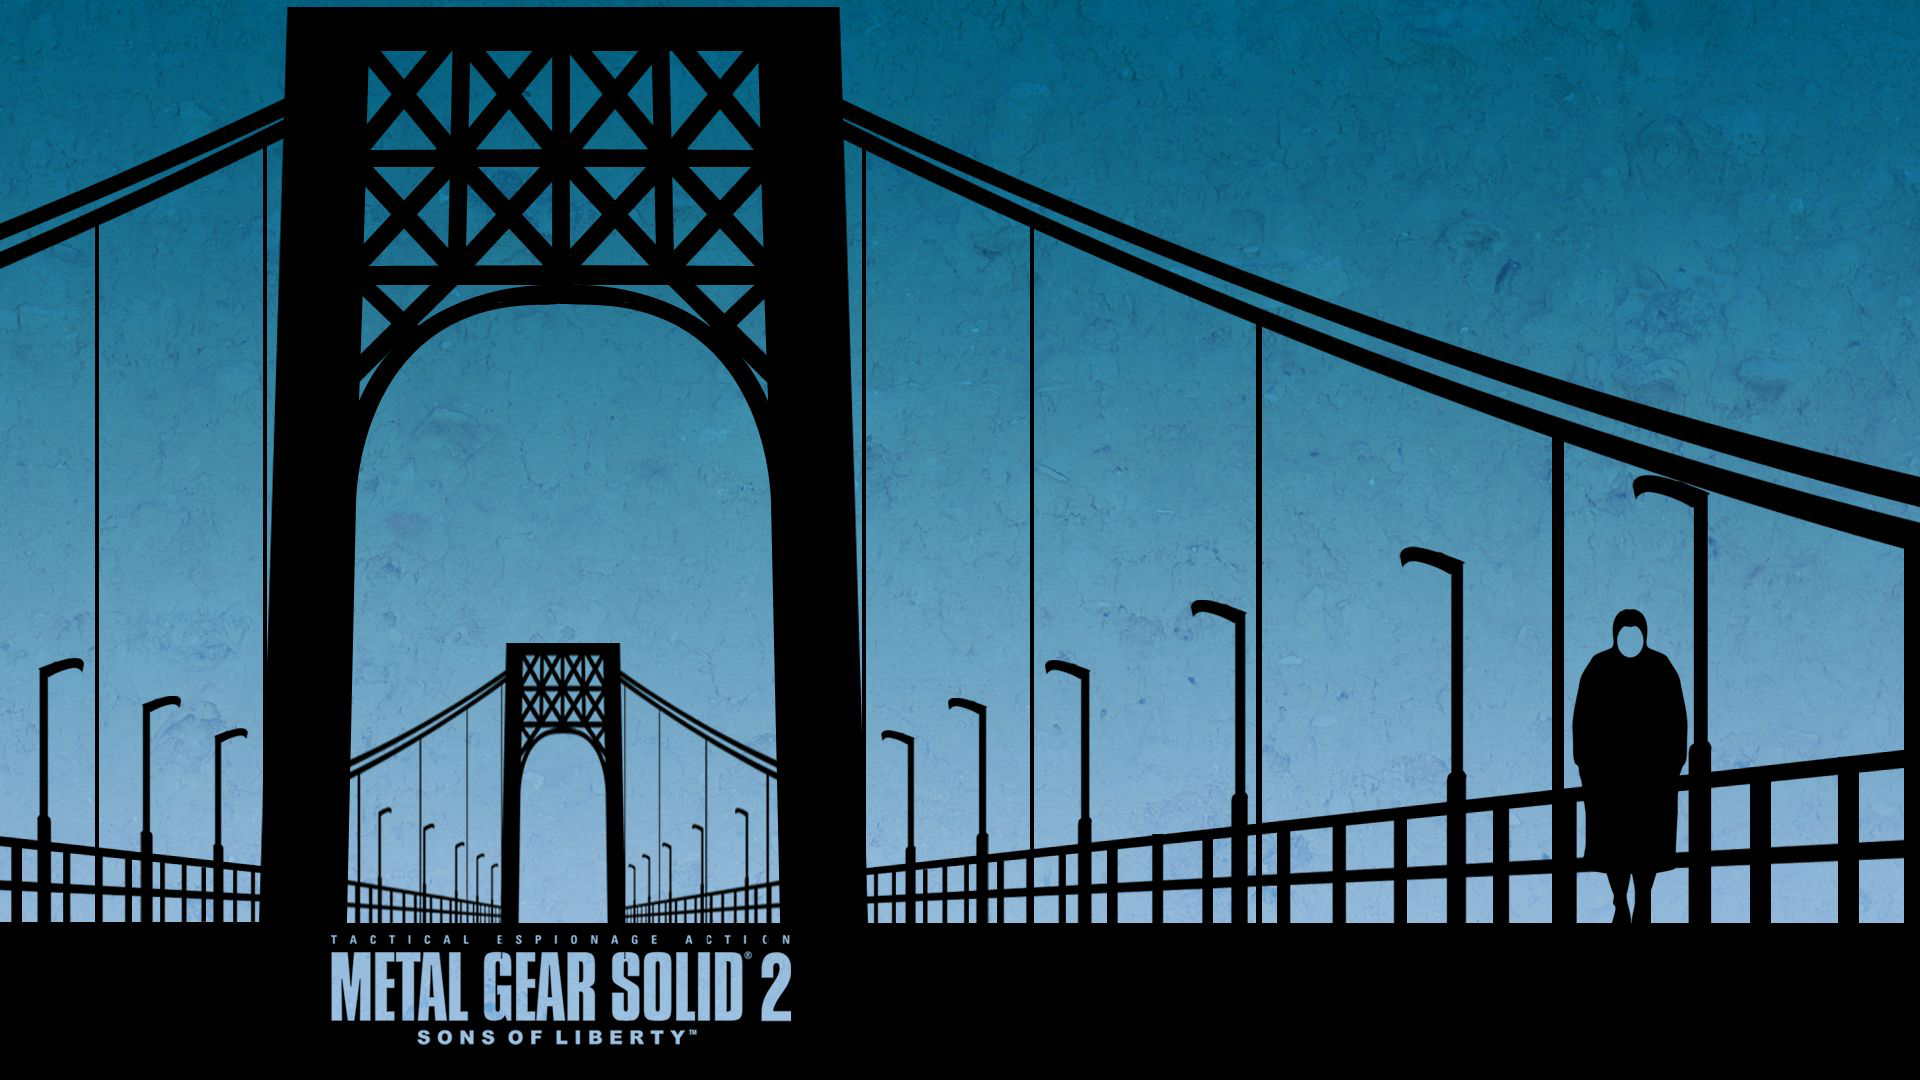 Metal Gear Solid 2: Sons Of Liberty Wallpapers